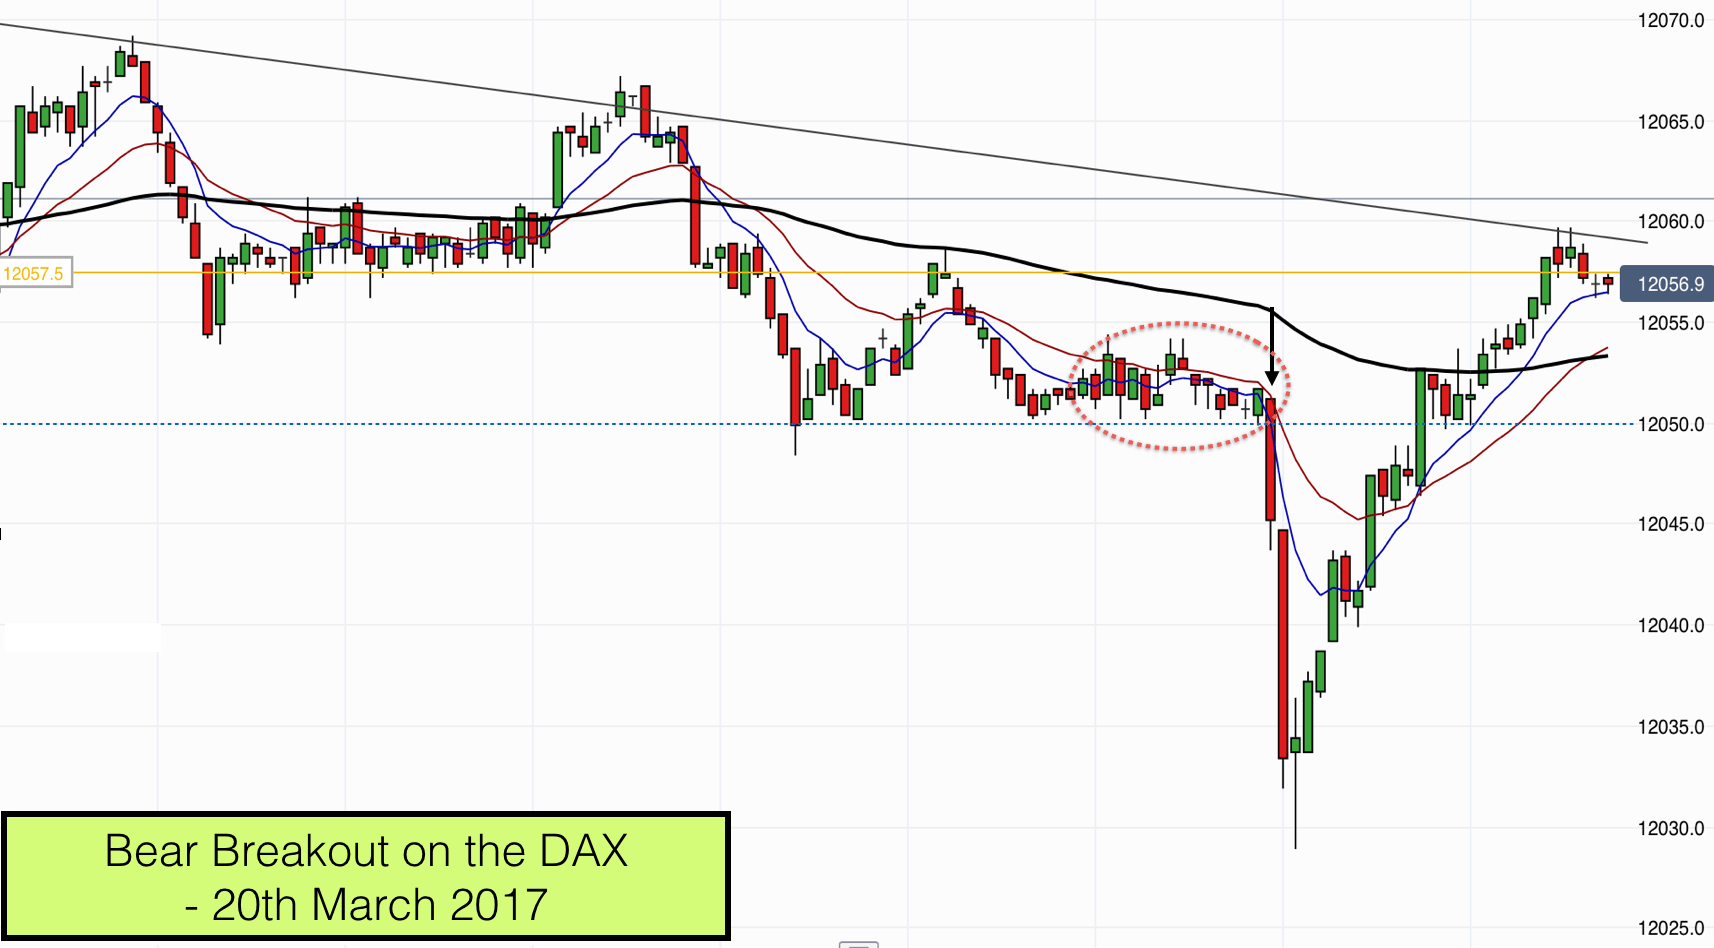 DAX Breakout 20th March 2017